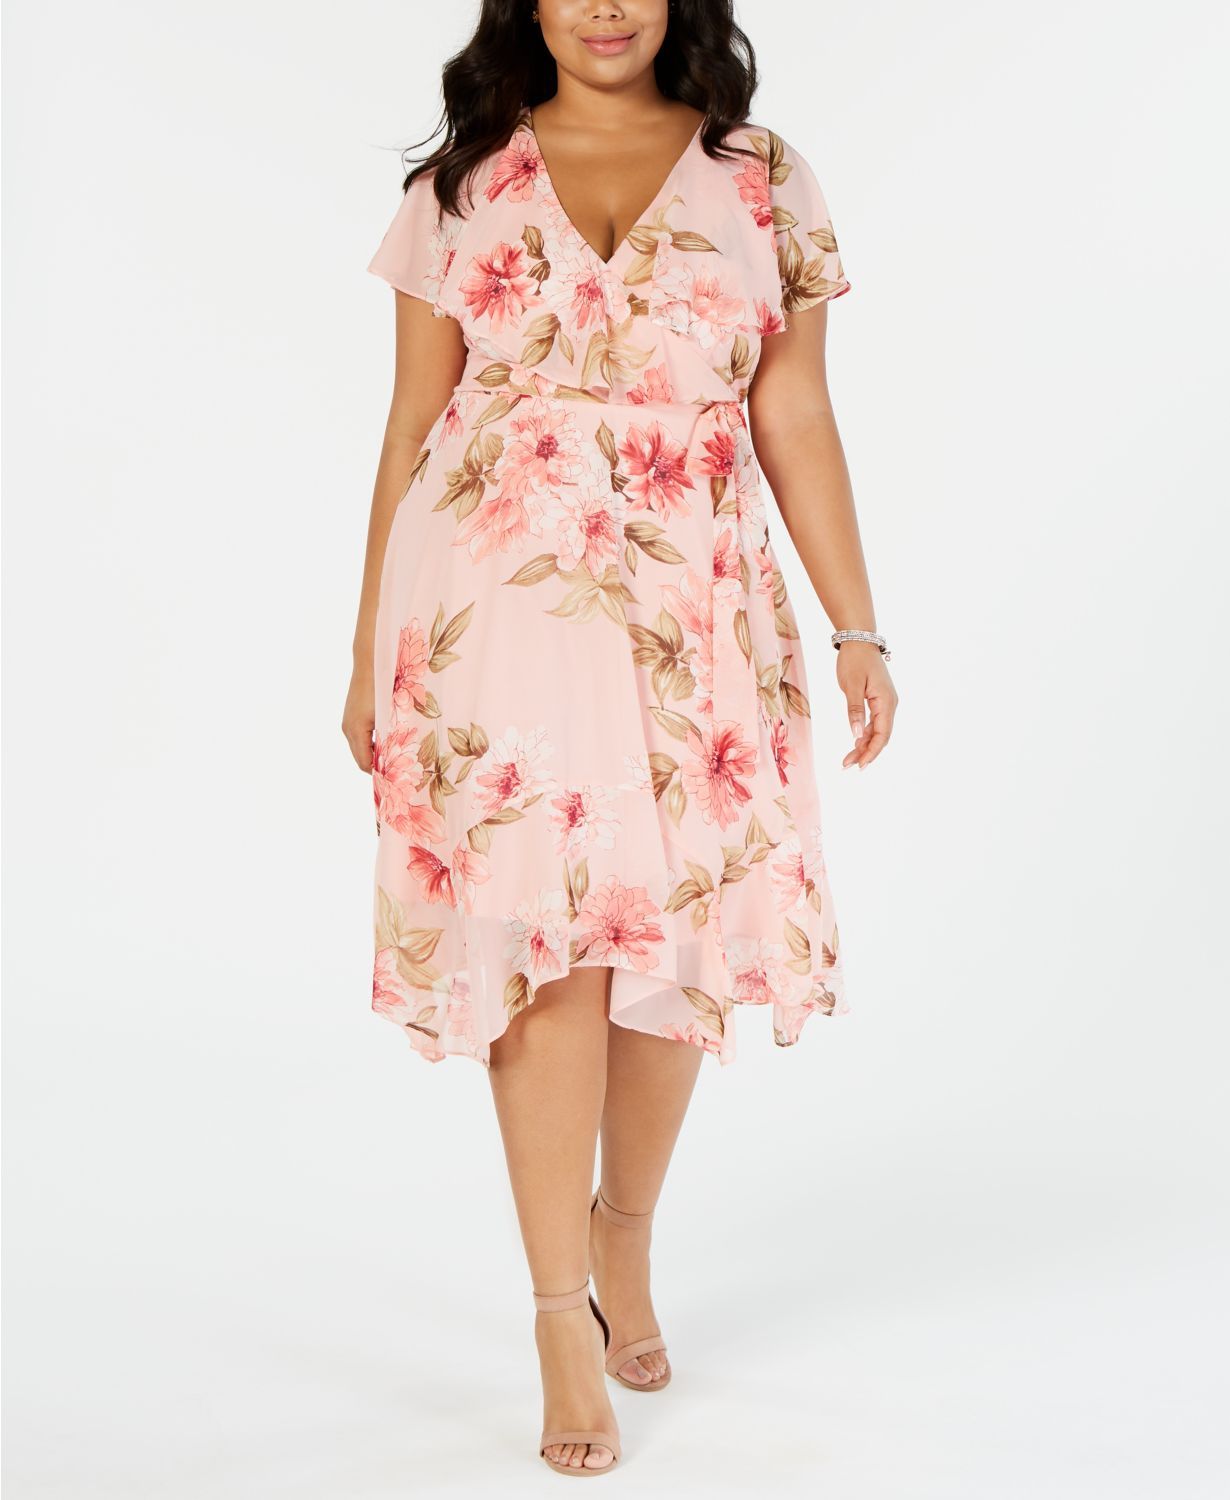 plus size easter outfit ideas